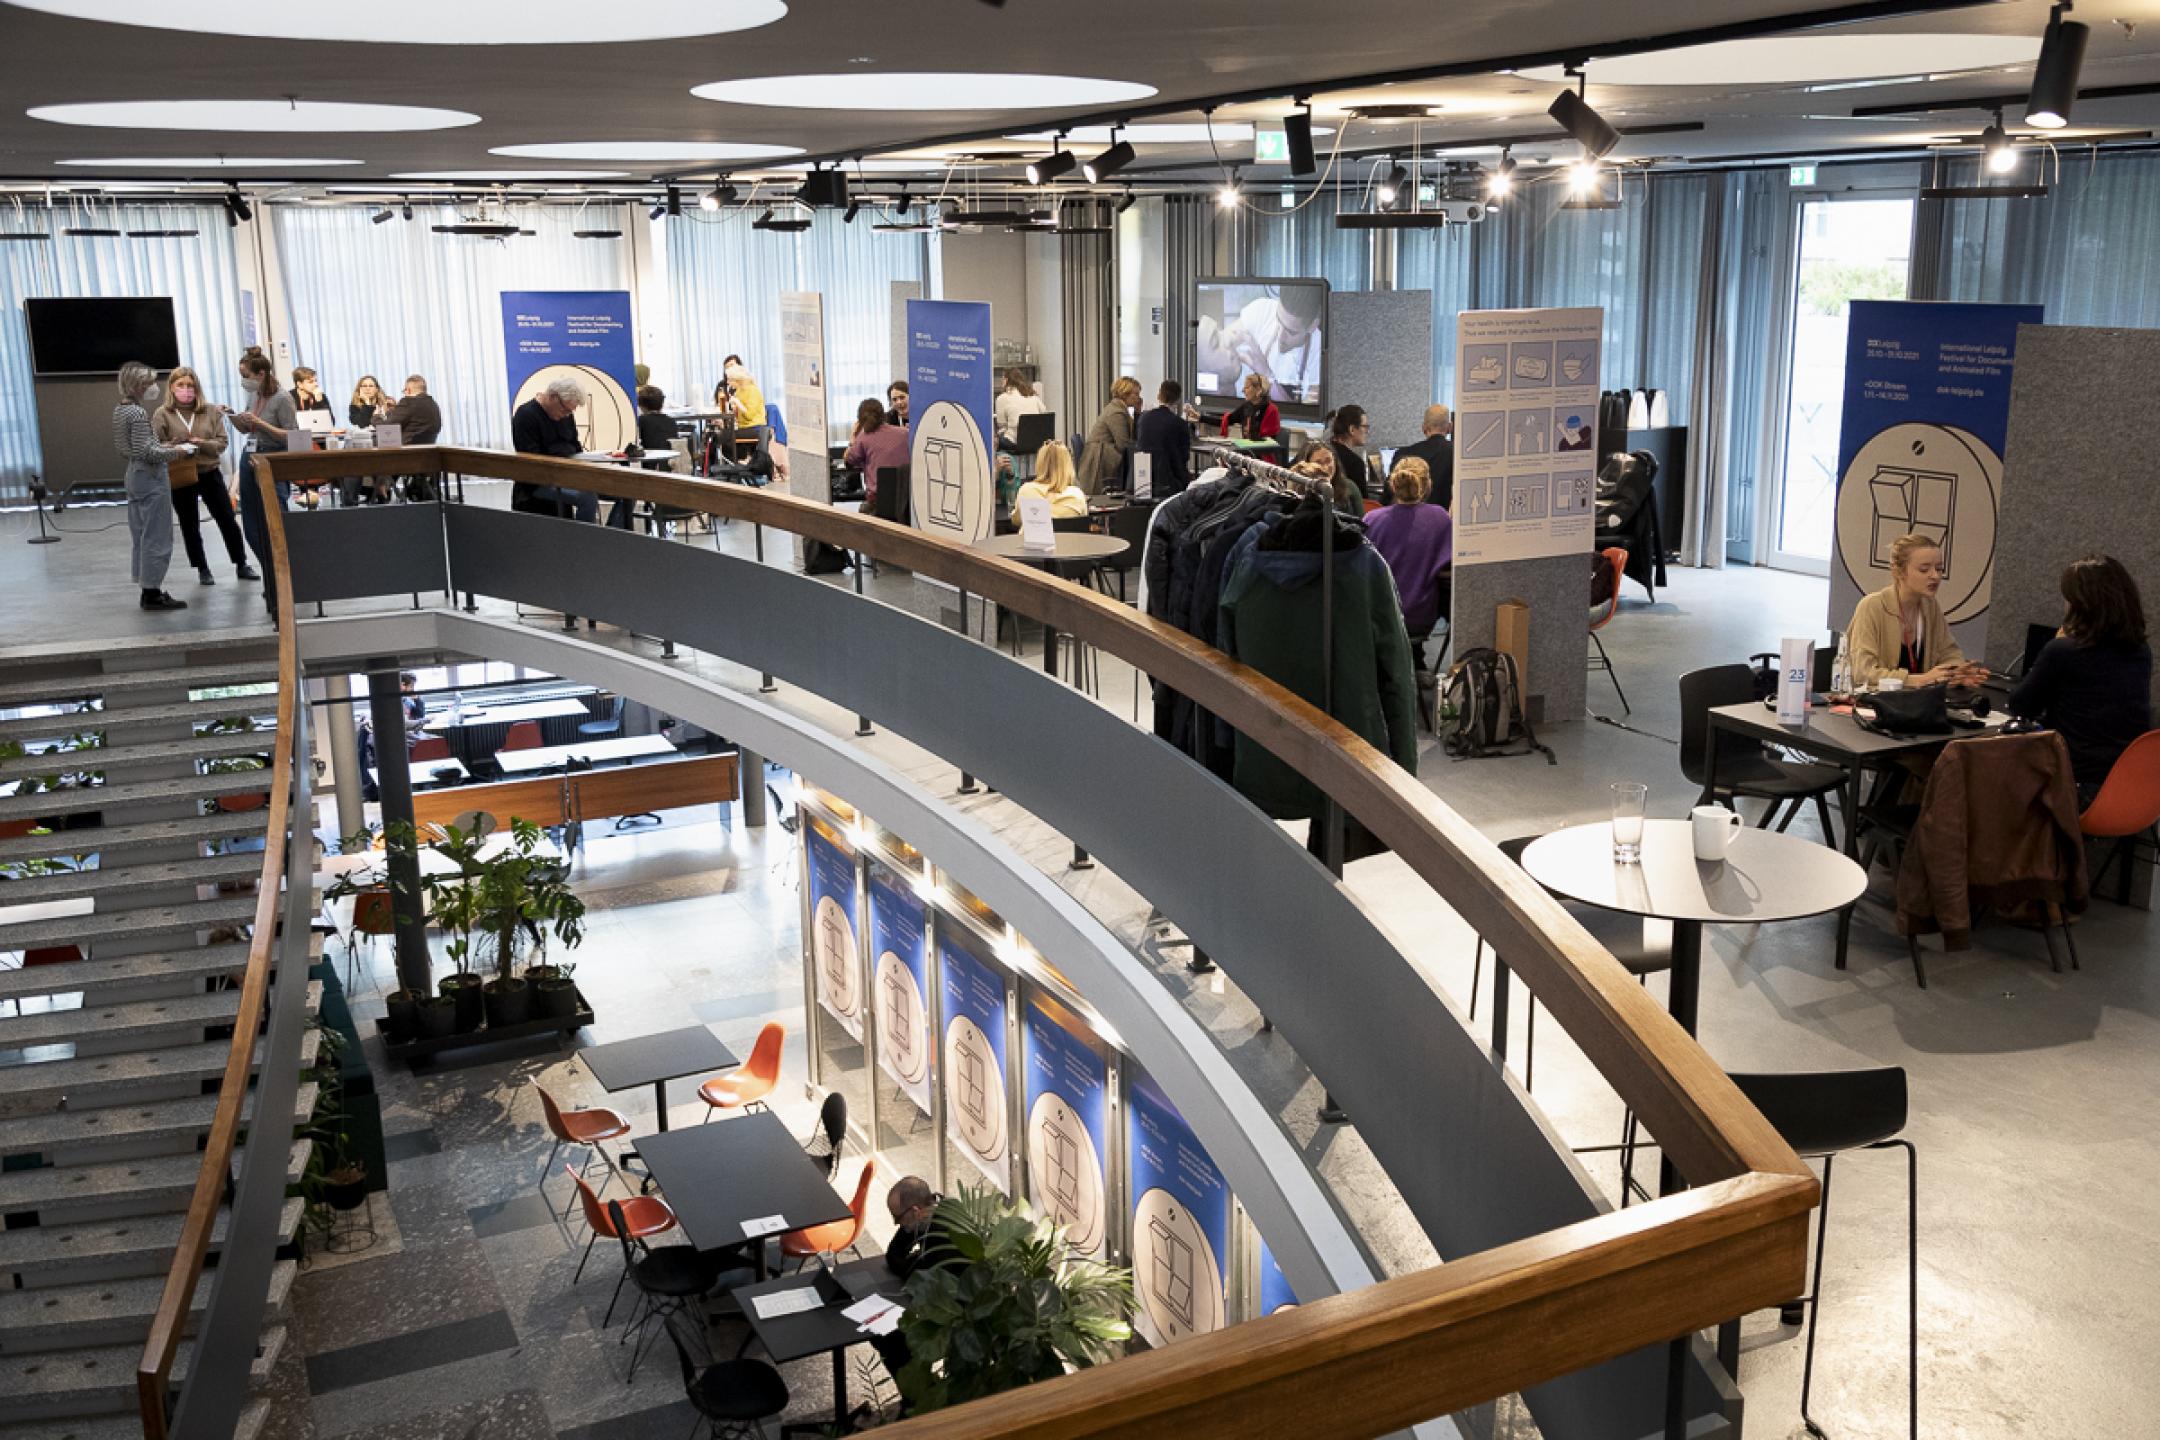 Overview of the Co-Pro Market meetings: A huge staircase is leading to the second floor of an open office space. There are several desks in open meeting compartments. Smalls groups of people (2–4) are sitting at the desks. 